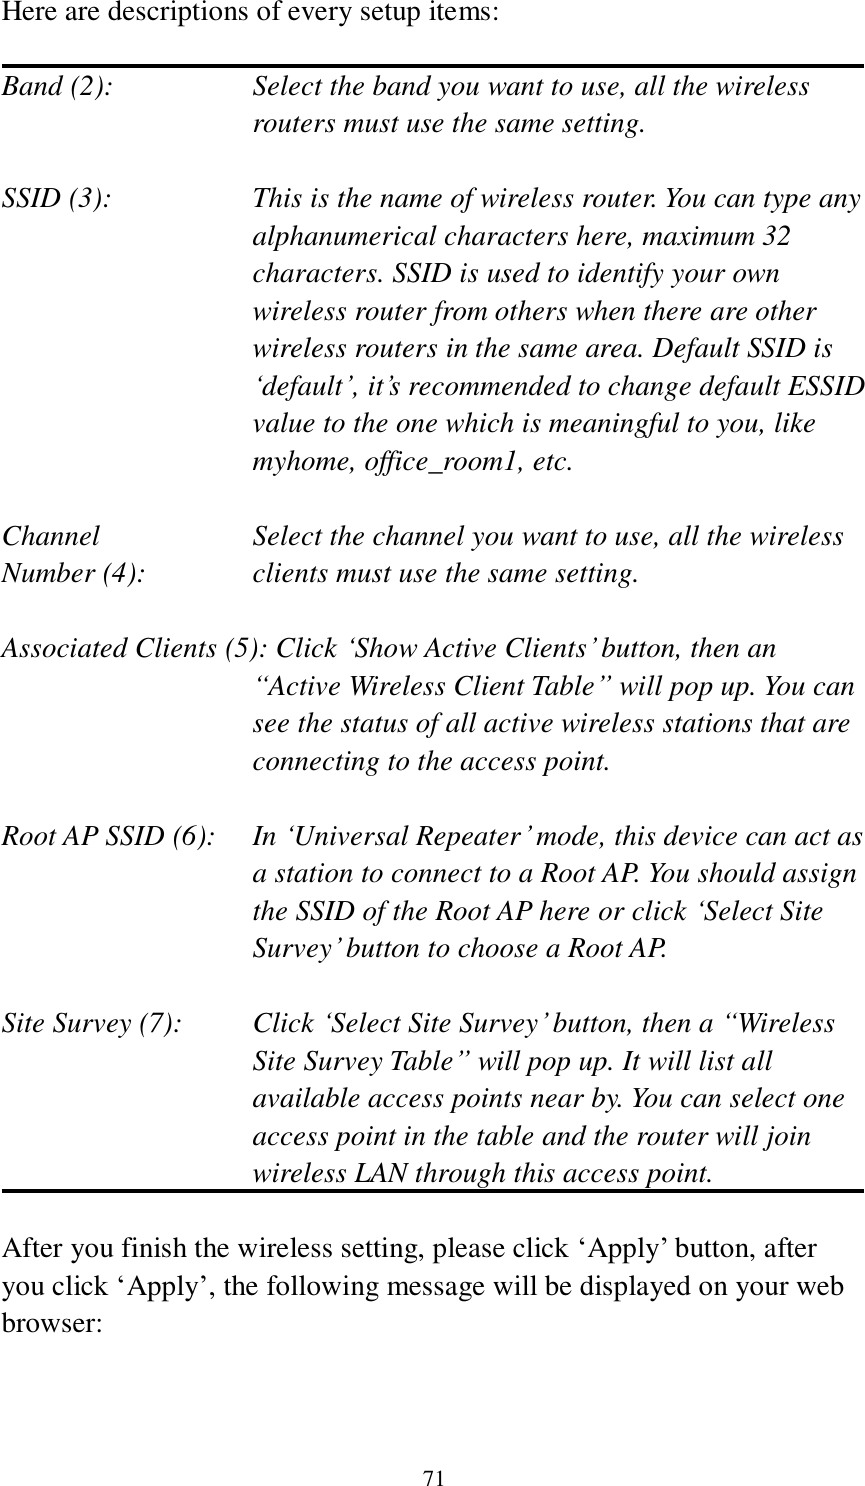 71 Here are descriptions of every setup items:  Band (2):  Select the band you want to use, all the wireless routers must use the same setting.  SSID (3):  This is the name of wireless router. You can type any alphanumerical characters here, maximum 32 characters. SSID is used to identify your own wireless router from others when there are other wireless routers in the same area. Default SSID is „default‟, it‟s recommended to change default ESSID value to the one which is meaningful to you, like myhome, office_room1, etc.  Channel  Select the channel you want to use, all the wireless Number (4):  clients must use the same setting.  Associated Clients (5): Click „Show Active Clients‟ button, then an “Active Wireless Client Table” will pop up. You can see the status of all active wireless stations that are connecting to the access point.  Root AP SSID (6):  In „Universal Repeater‟ mode, this device can act as a station to connect to a Root AP. You should assign the SSID of the Root AP here or click „Select Site Survey‟ button to choose a Root AP.  Site Survey (7):  Click „Select Site Survey‟ button, then a “Wireless Site Survey Table” will pop up. It will list all available access points near by. You can select one access point in the table and the router will join wireless LAN through this access point.  After you finish the wireless setting, please click „Apply‟ button, after you click „Apply‟, the following message will be displayed on your web browser:  